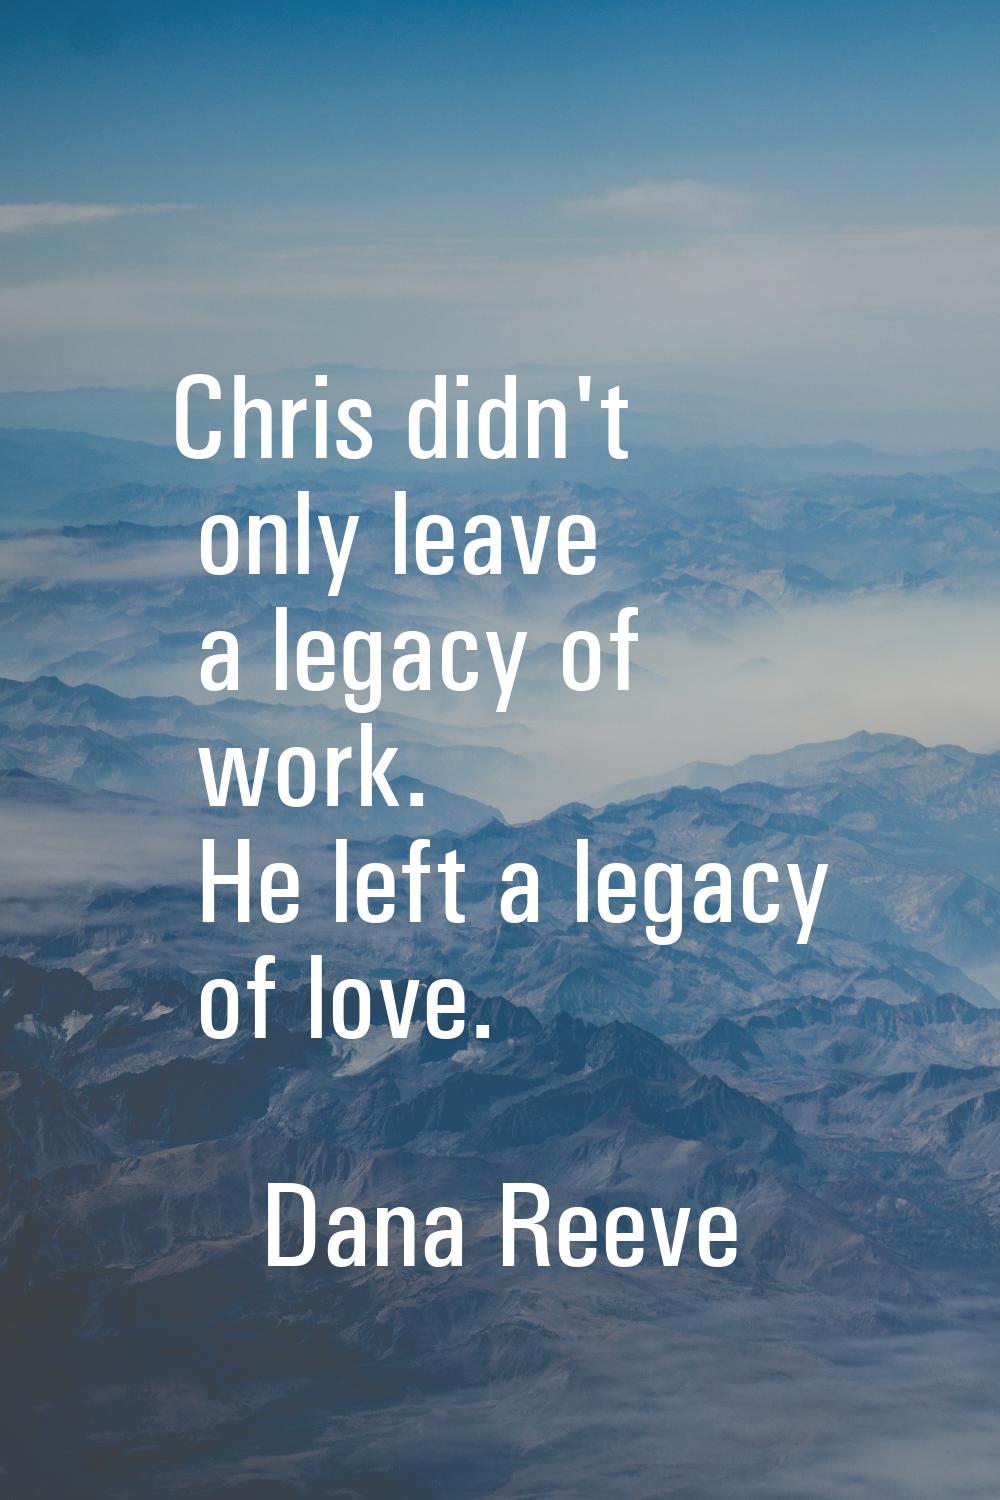 Chris didn't only leave a legacy of work. He left a legacy of love.